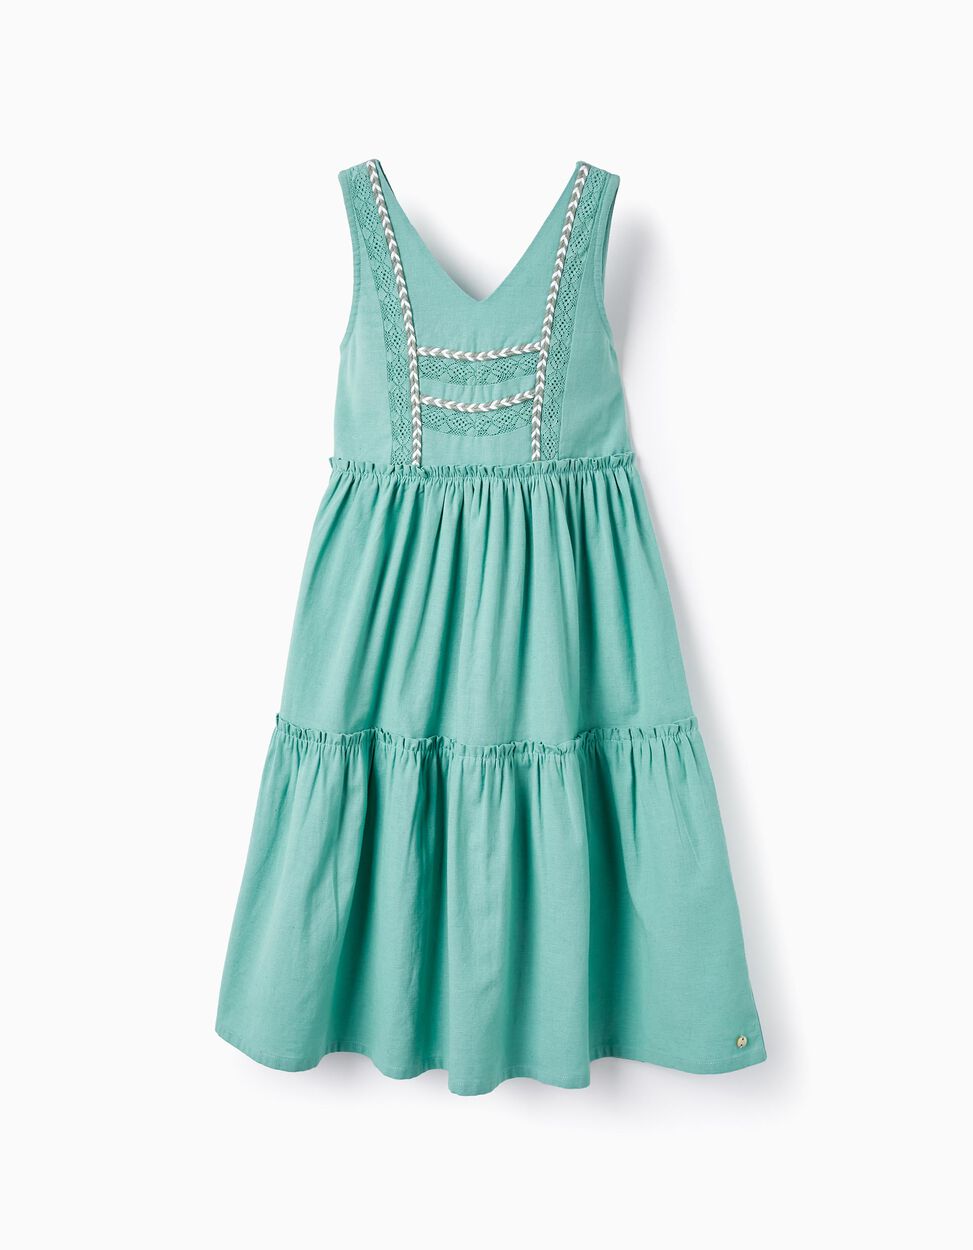 Buy Online Cotton and Linen Dress for Girls, Green